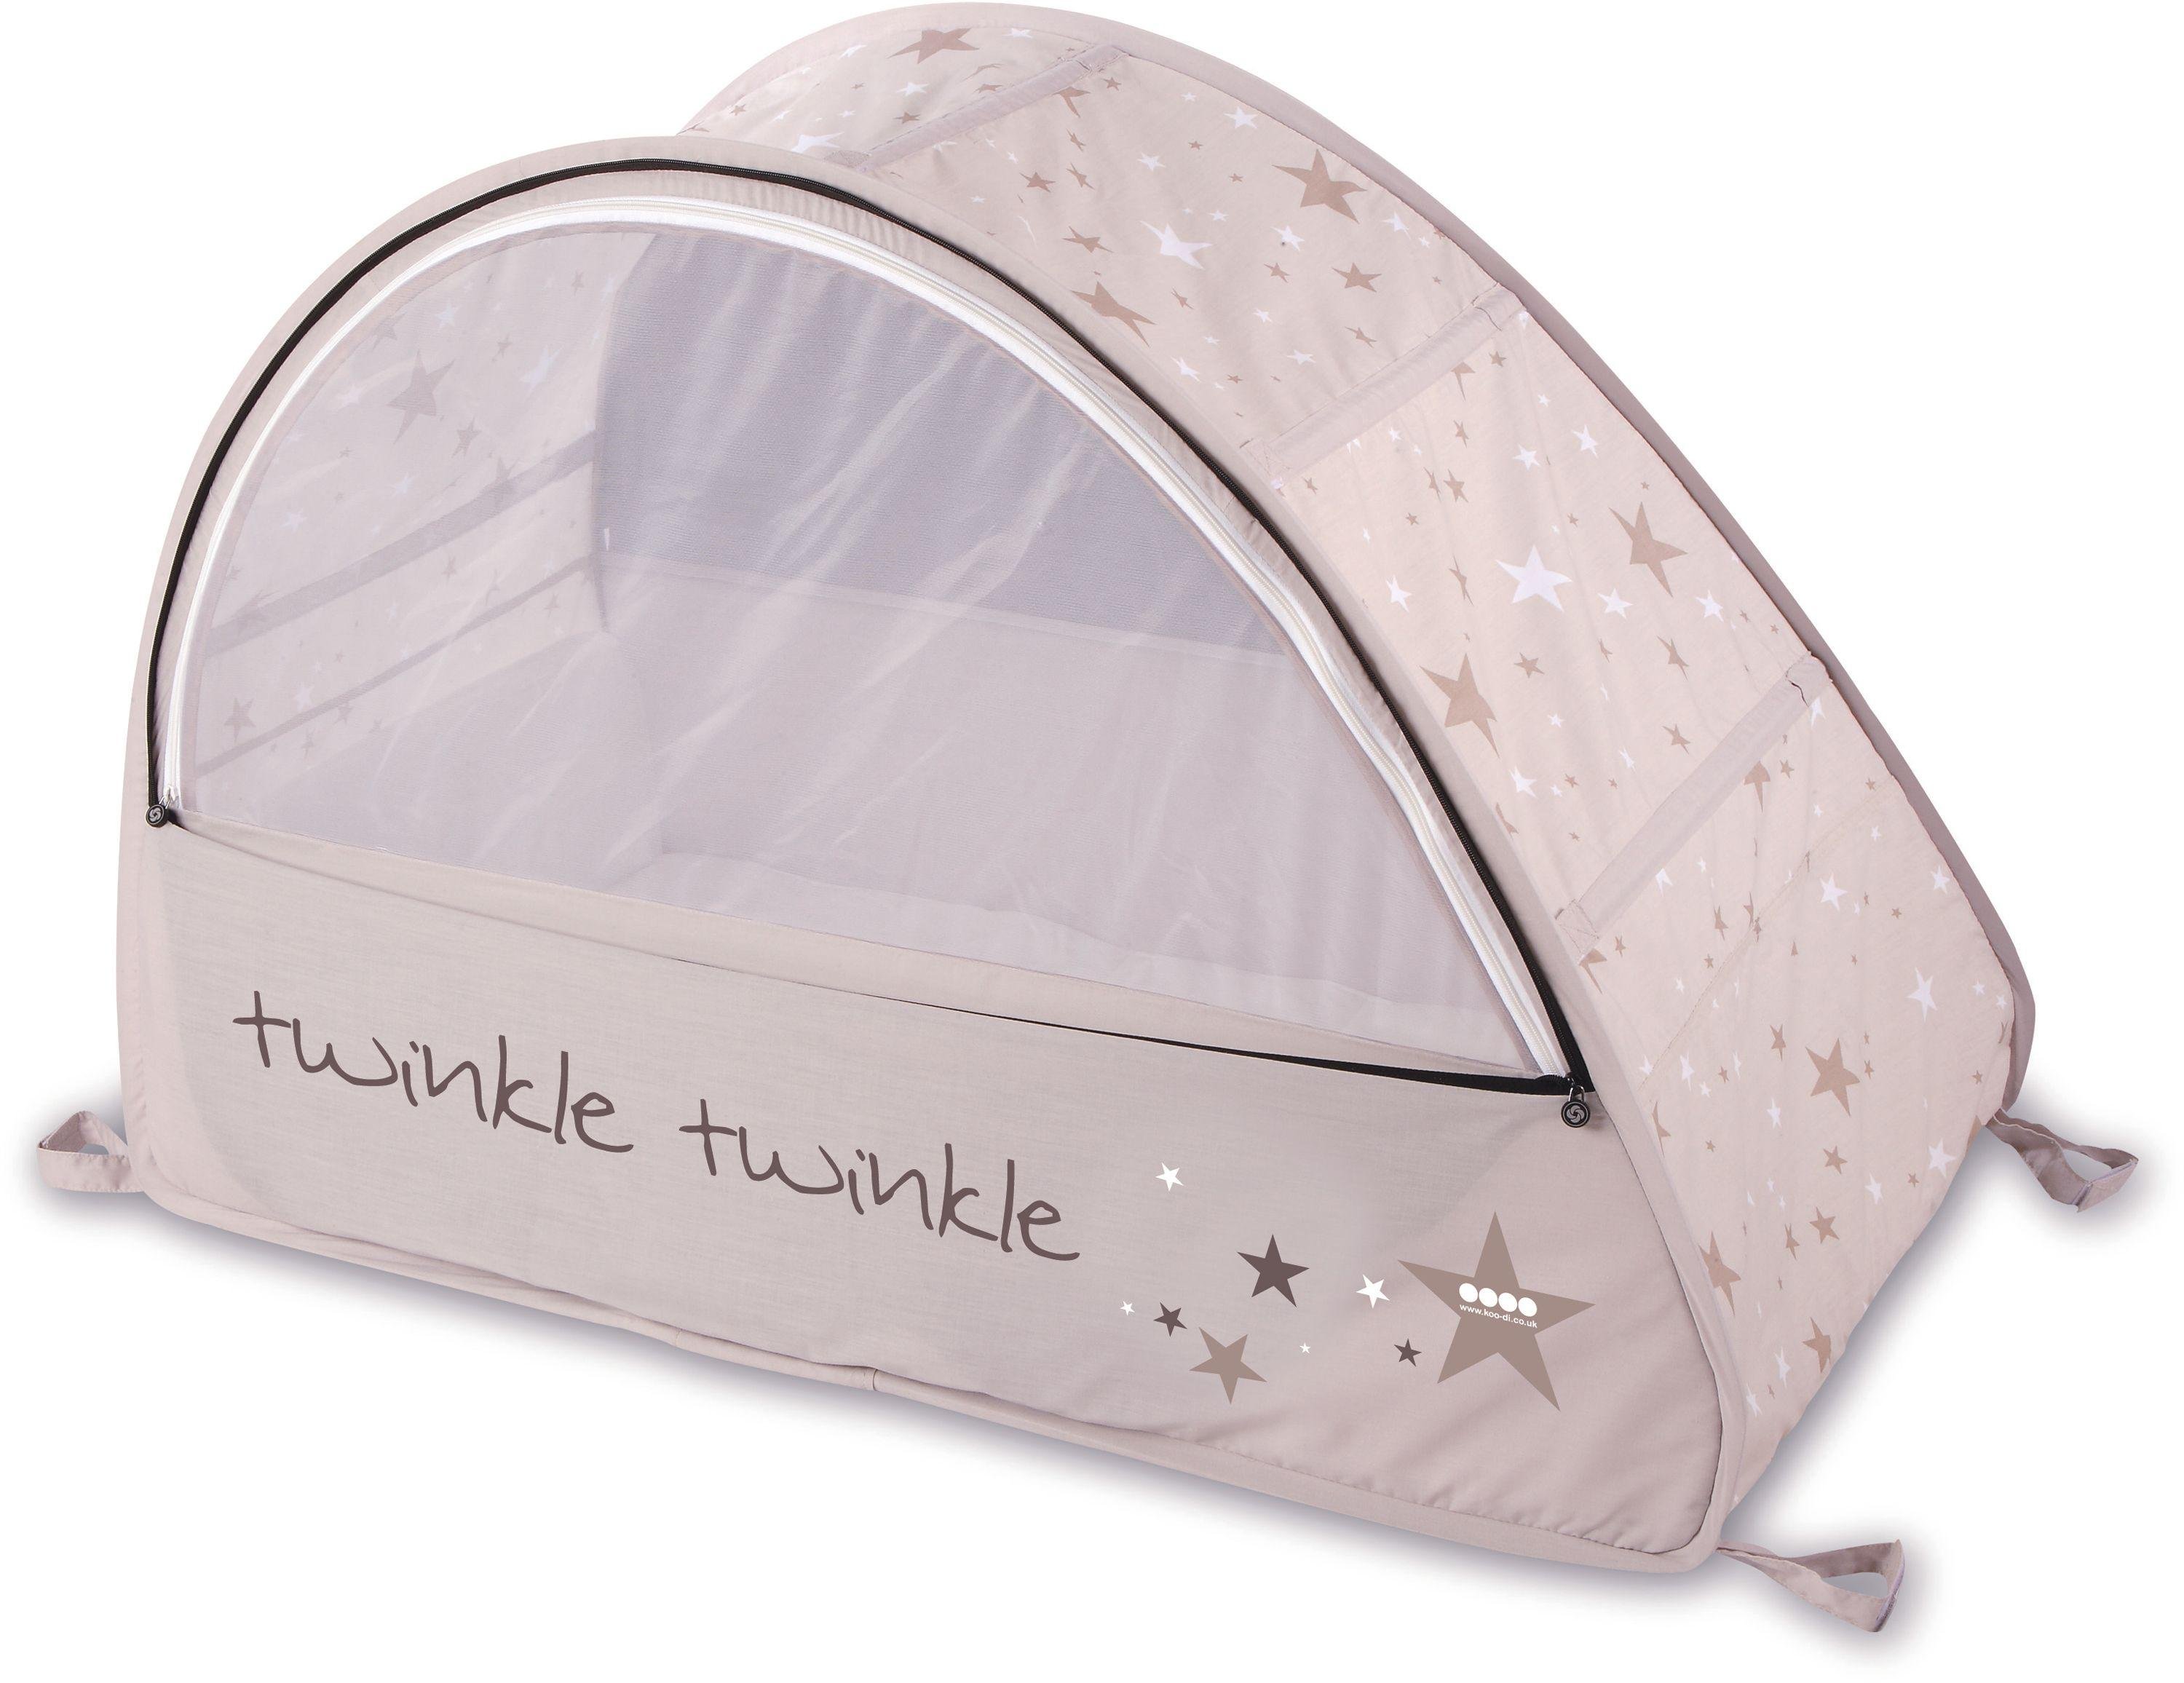 Koo-di Pop Up Sun and Sleep Bubble Travel Cot. Review